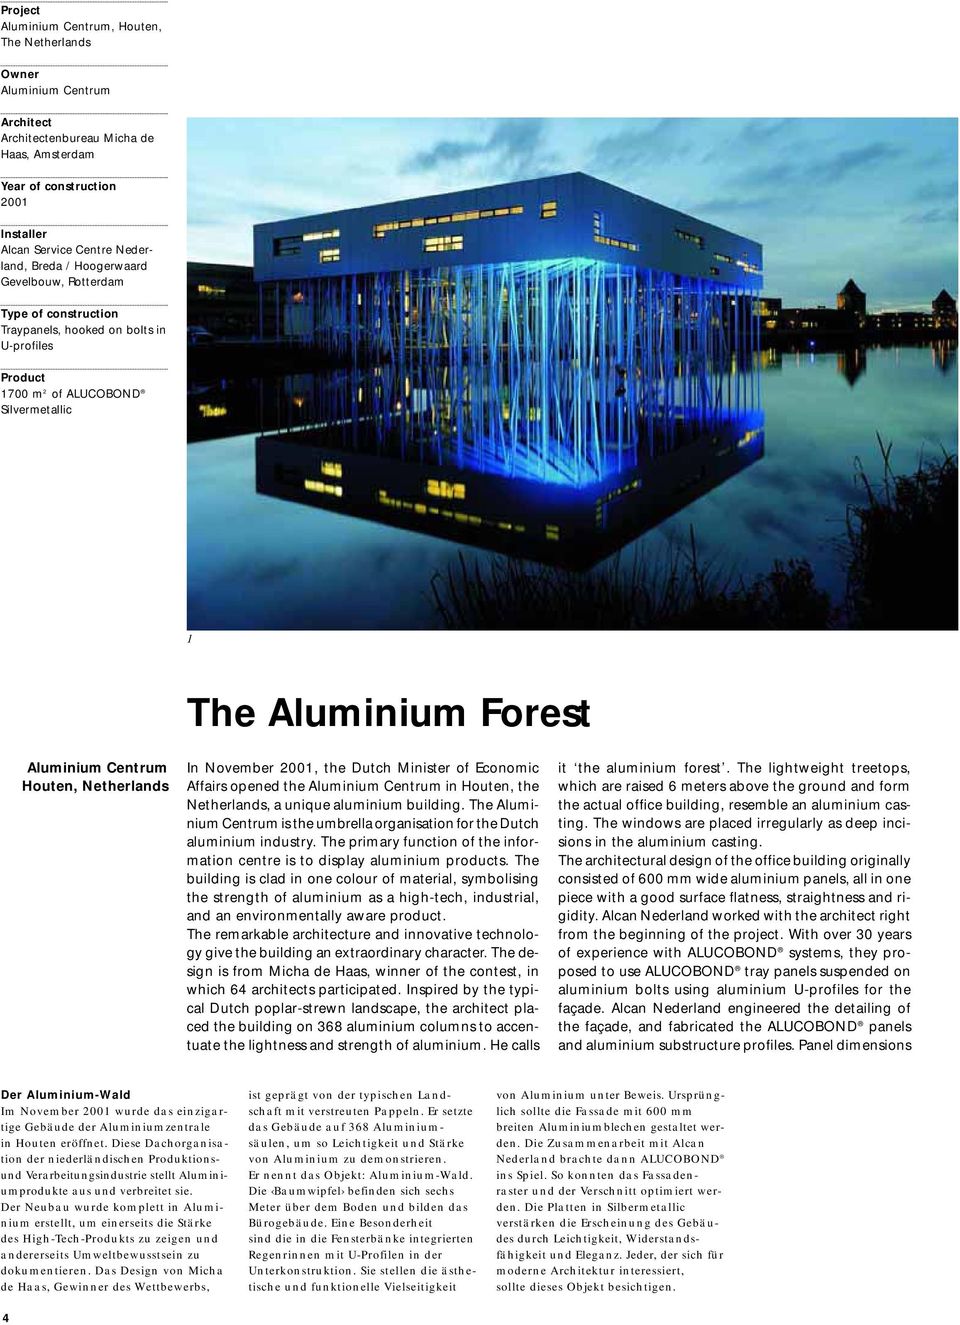 Netherlands In November 2001, the Dutch Minister of Economic Affairs opened the Aluminium Centrum in Houten, the Netherlands, a unique aluminium building.